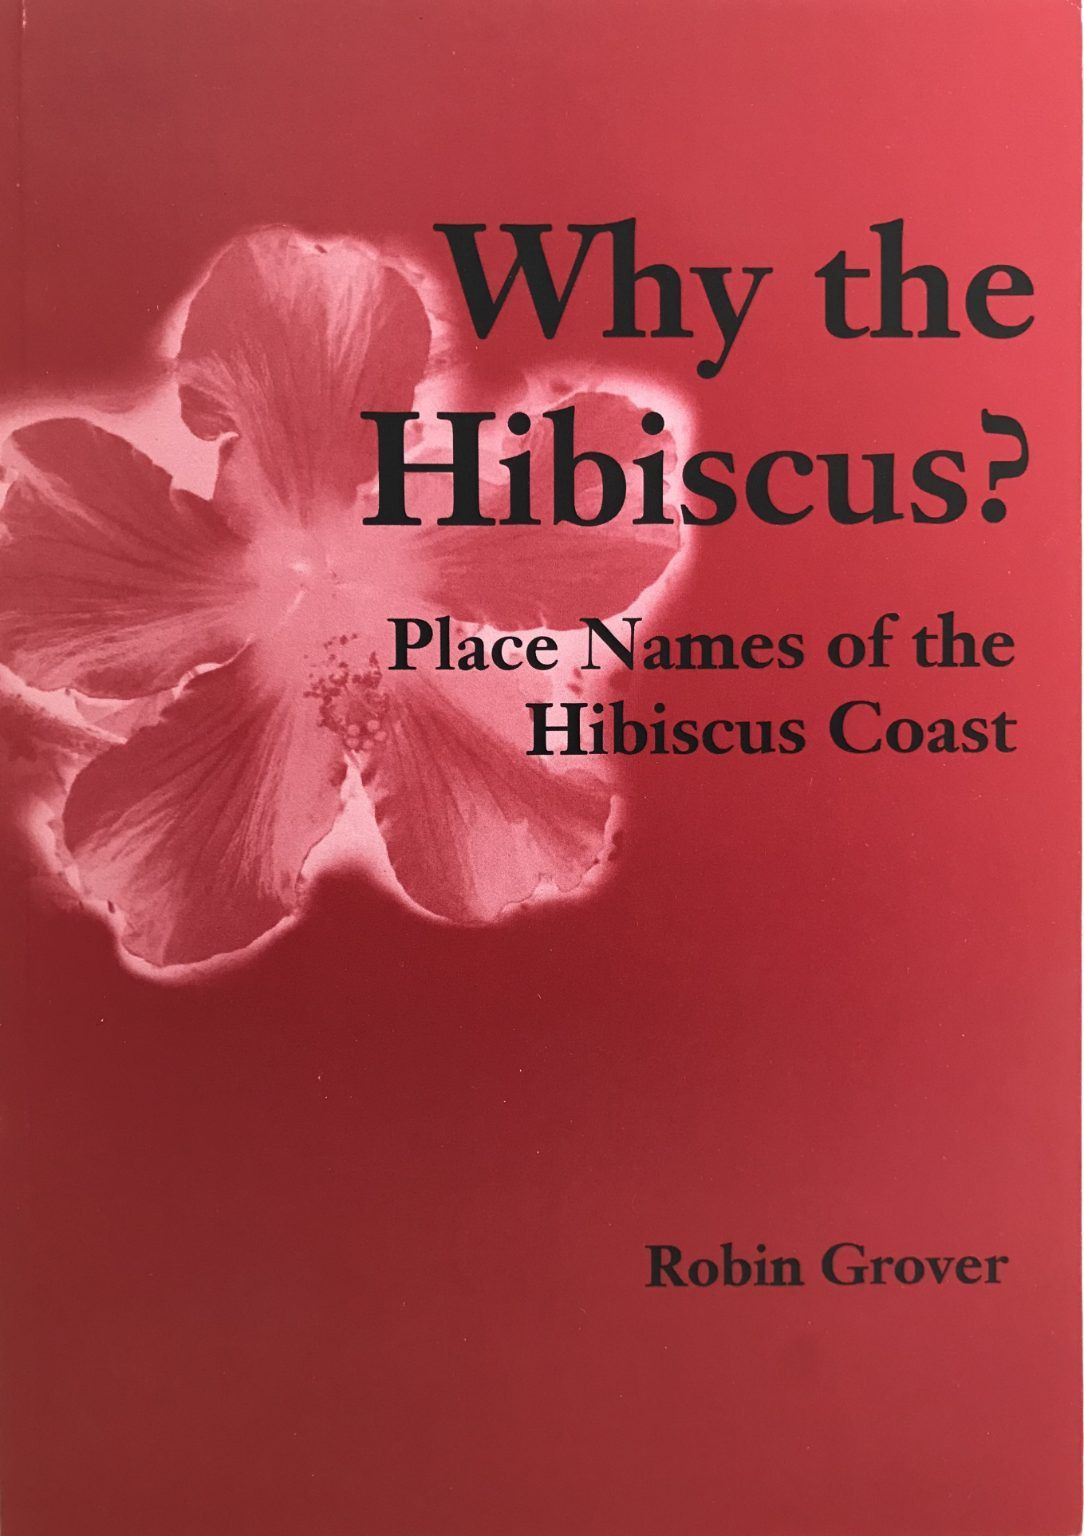 WHY THE HIBISCUS? Place Names of the Hibiscus Coast